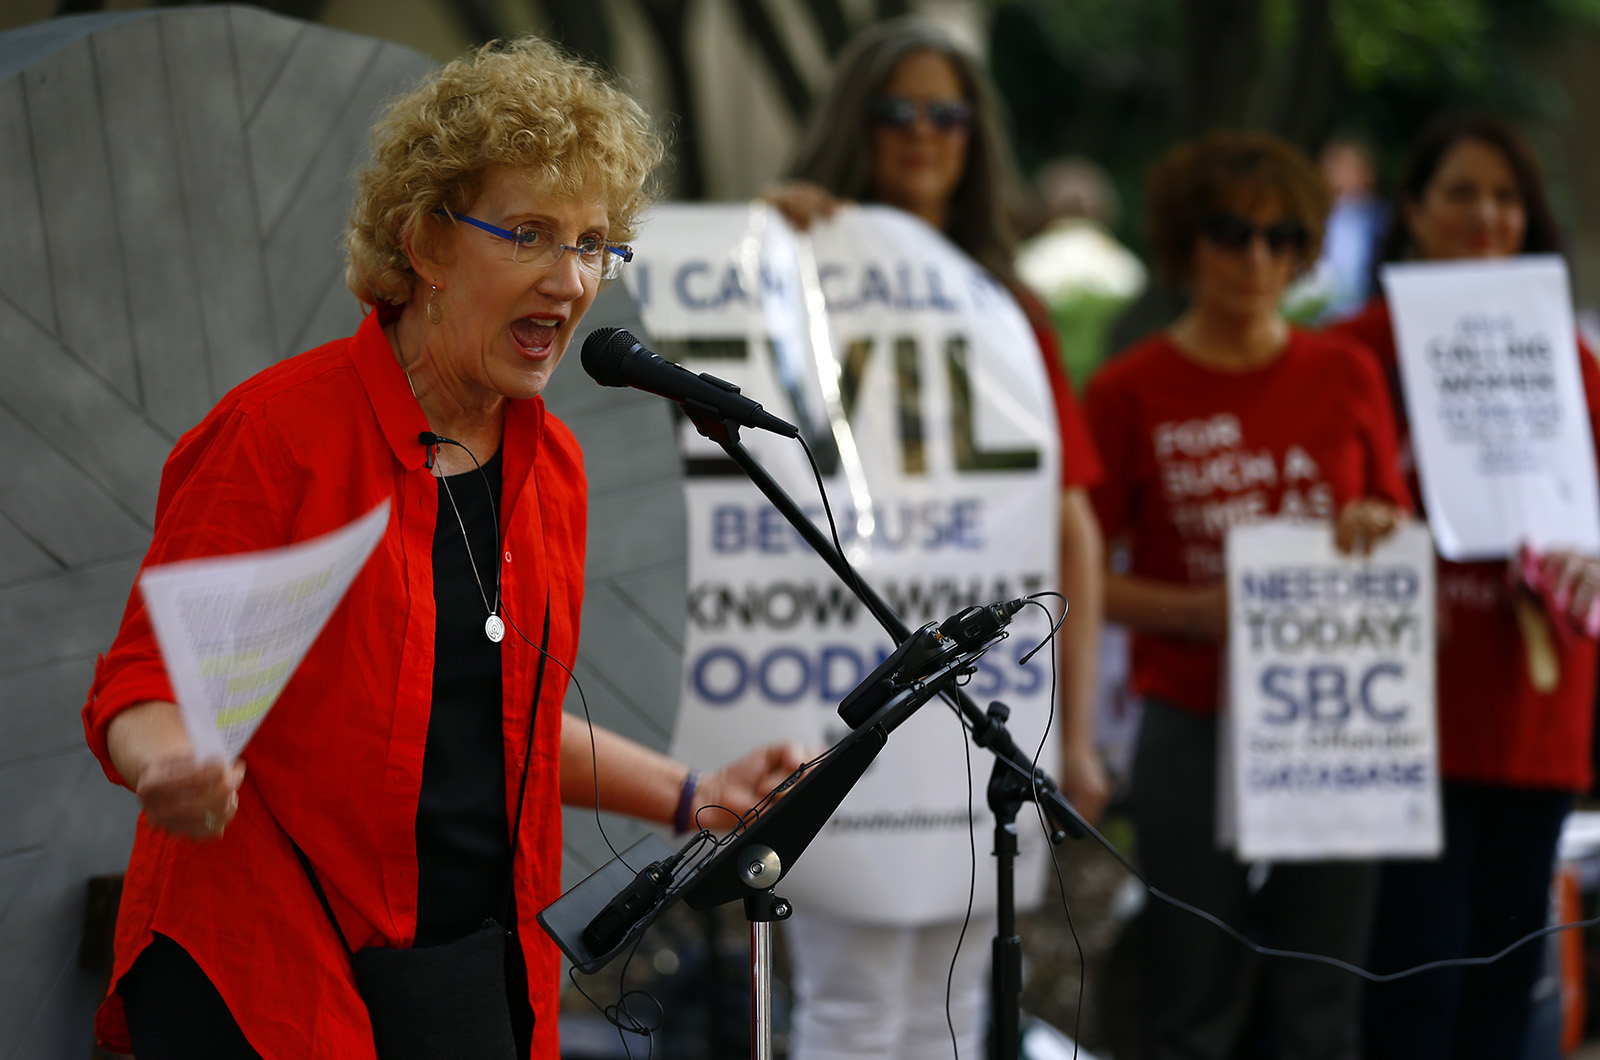 Christa Brown talks about her abuse at a rally outside the annual meeting of the Southern Baptist Convention at the Birmingham-Jefferson Convention Complex, June 11, 2019, in Birmingham, Alabama. RNS photo by Butch Dill